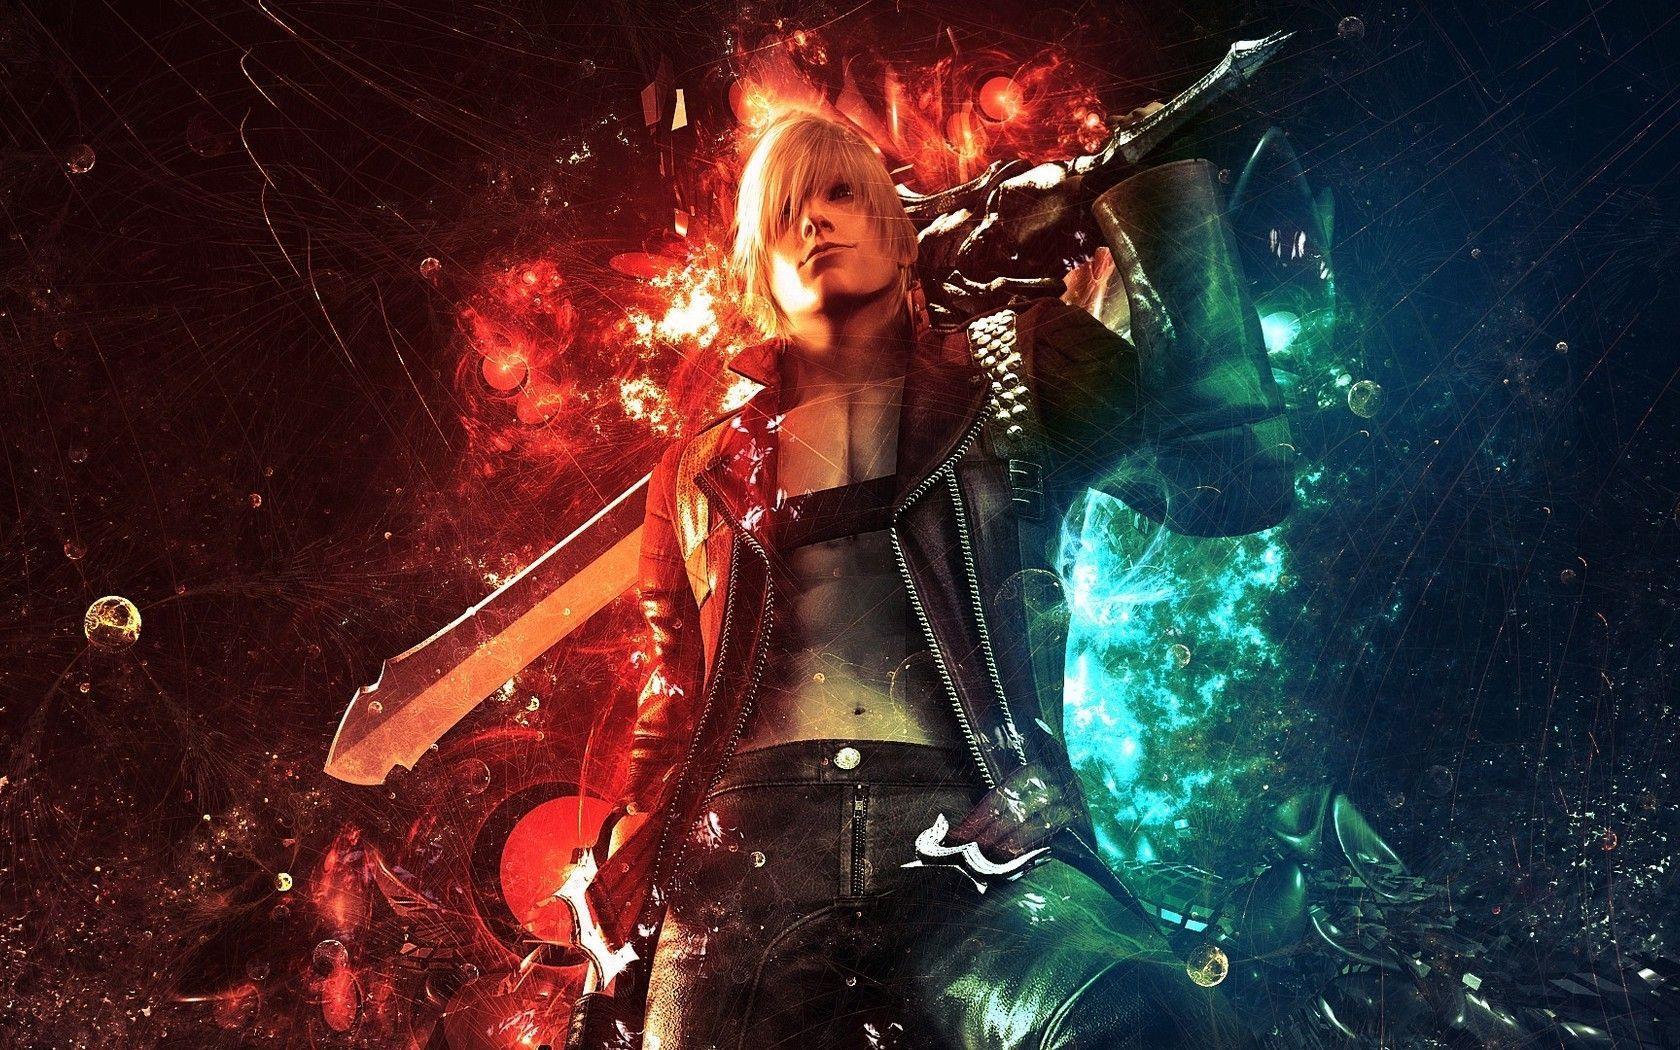 NEWS Next Devil May Cry Title expected